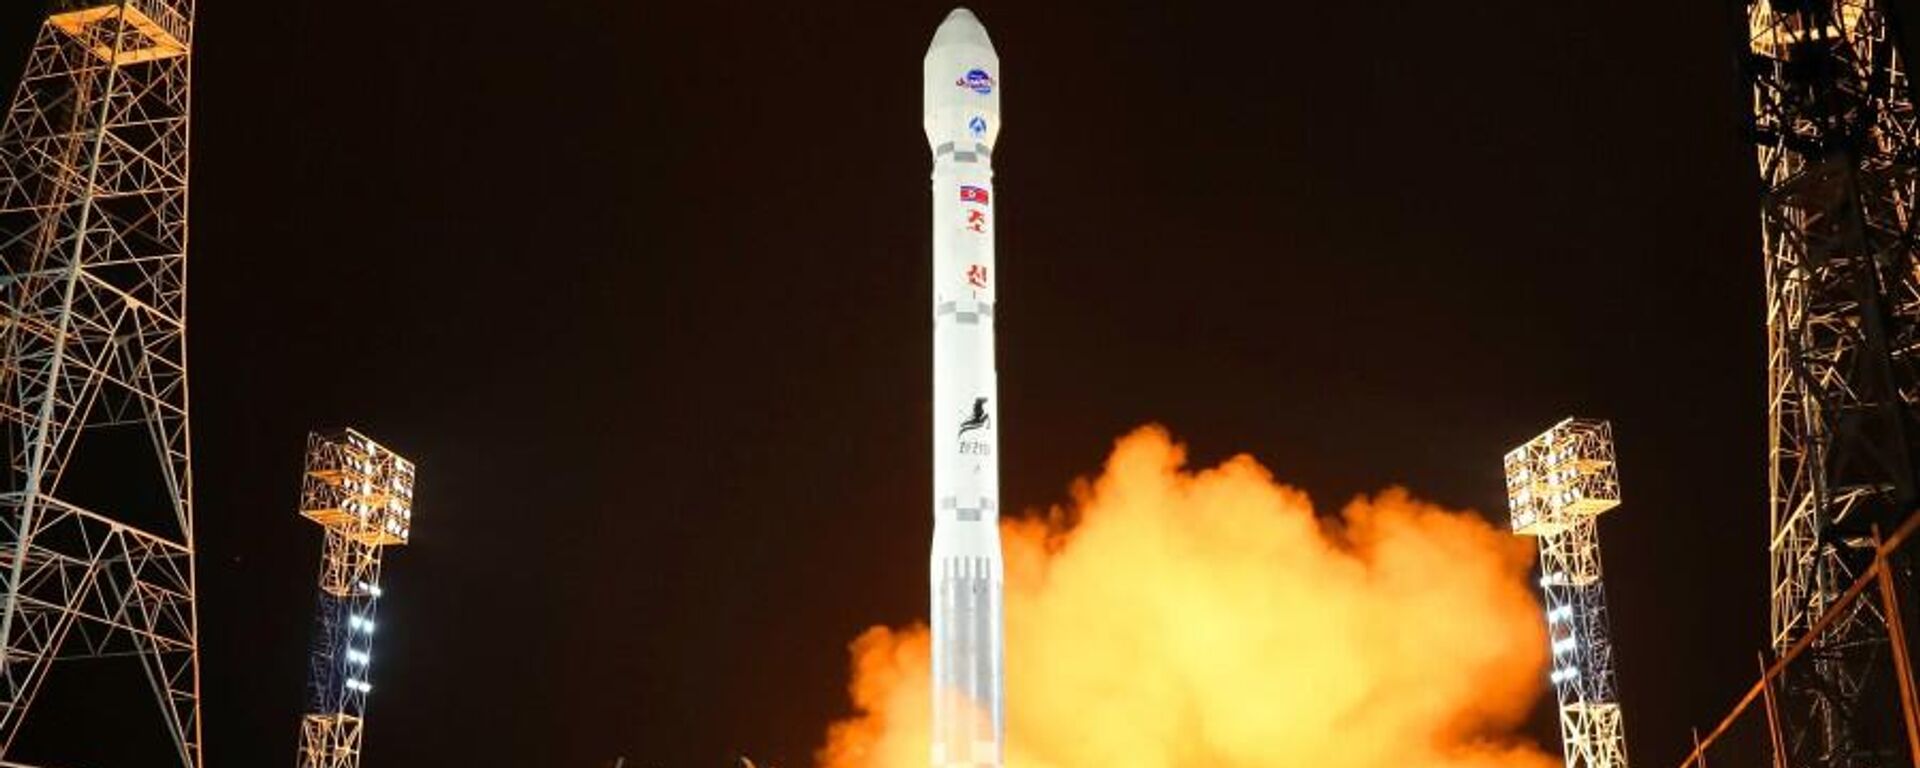 The General Bureau of Aerospace Engineering of the DPRK successfully launched the Manrigyong-1 reconnaissance satellite at 22 hours, 42 minutes and 28 seconds on November 21, 112 Juche (2023) using a new type of Chollima-1 carrier rocket from Sohae Space Center in Cholsan County, North Pyongan Province. - Sputnik International, 1920, 31.12.2023